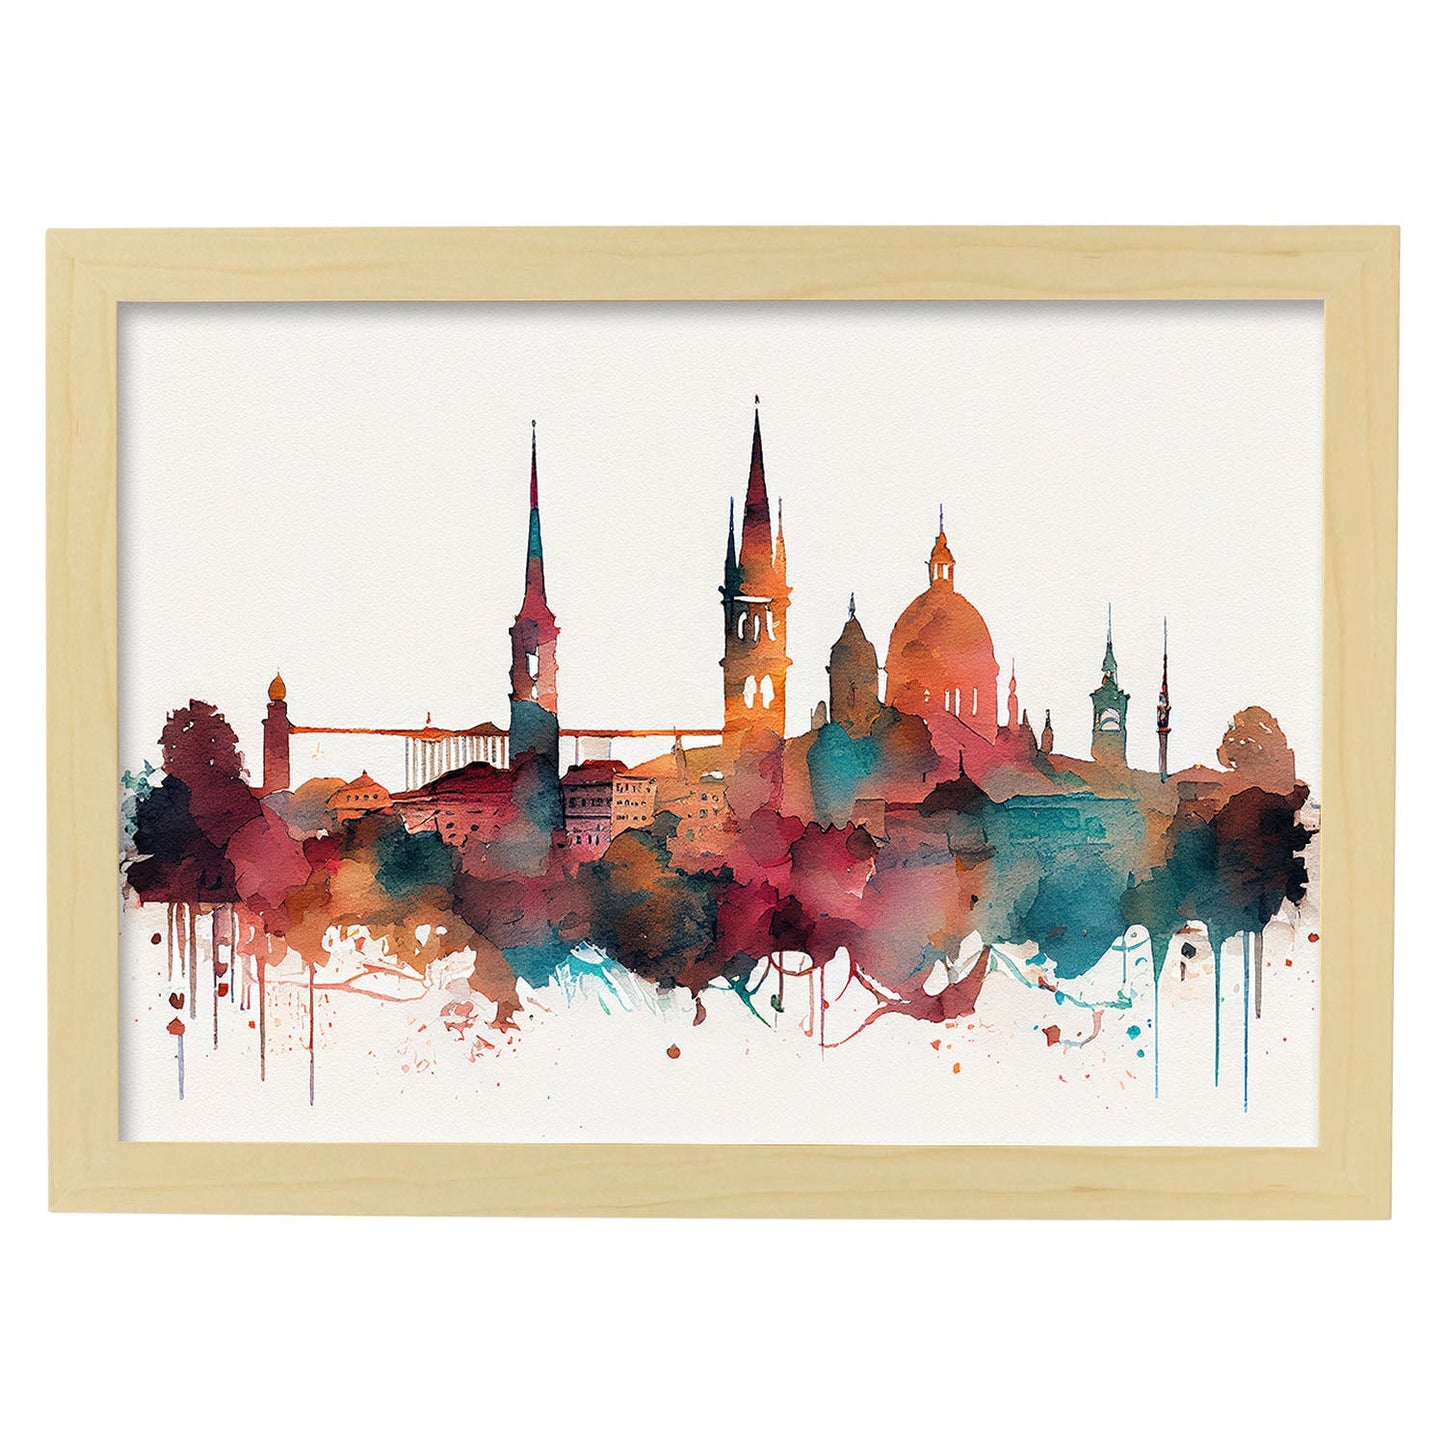 Nacnic watercolor of a skyline of the city of Zurich. Aesthetic Wall Art Prints for Bedroom or Living Room Design.-Artwork-Nacnic-A4-Marco Madera Clara-Nacnic Estudio SL